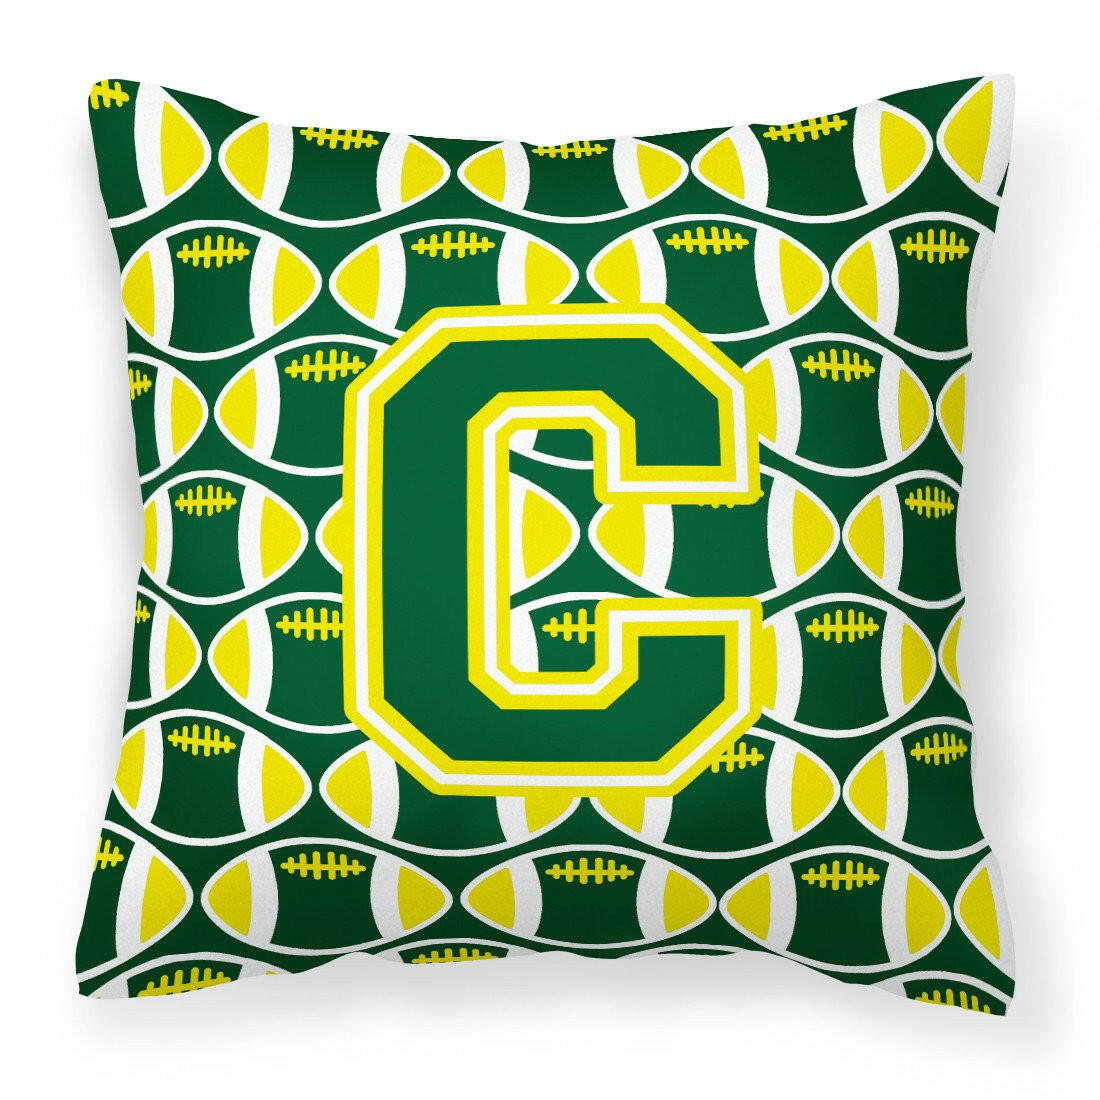 Letter C Football Green and Yellow Fabric Decorative Pillow CJ1075-CPW1414 by Caroline's Treasures